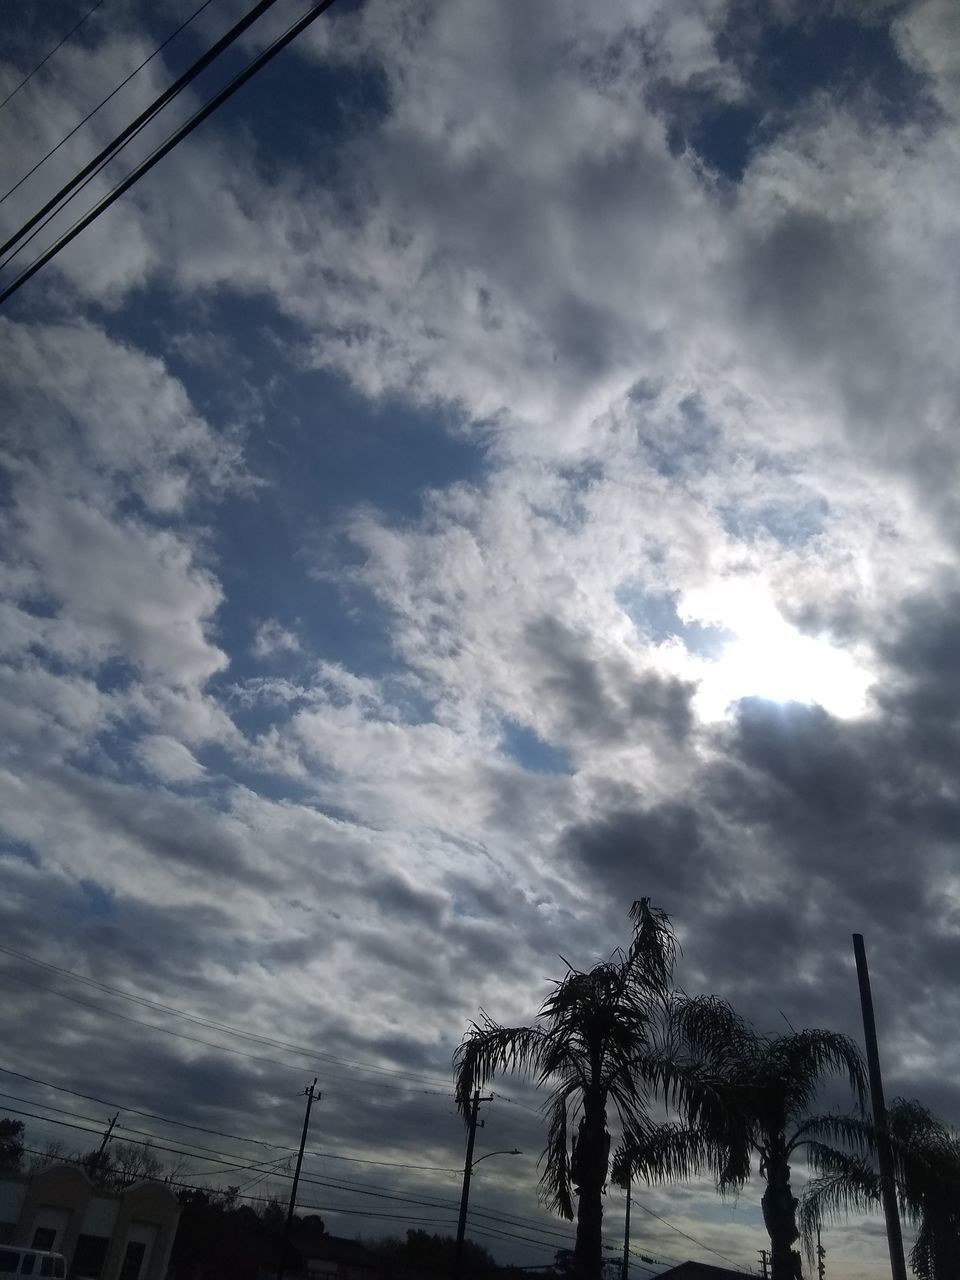 LOW ANGLE VIEW OF PALM TREES AGAINST CLOUDY SKY